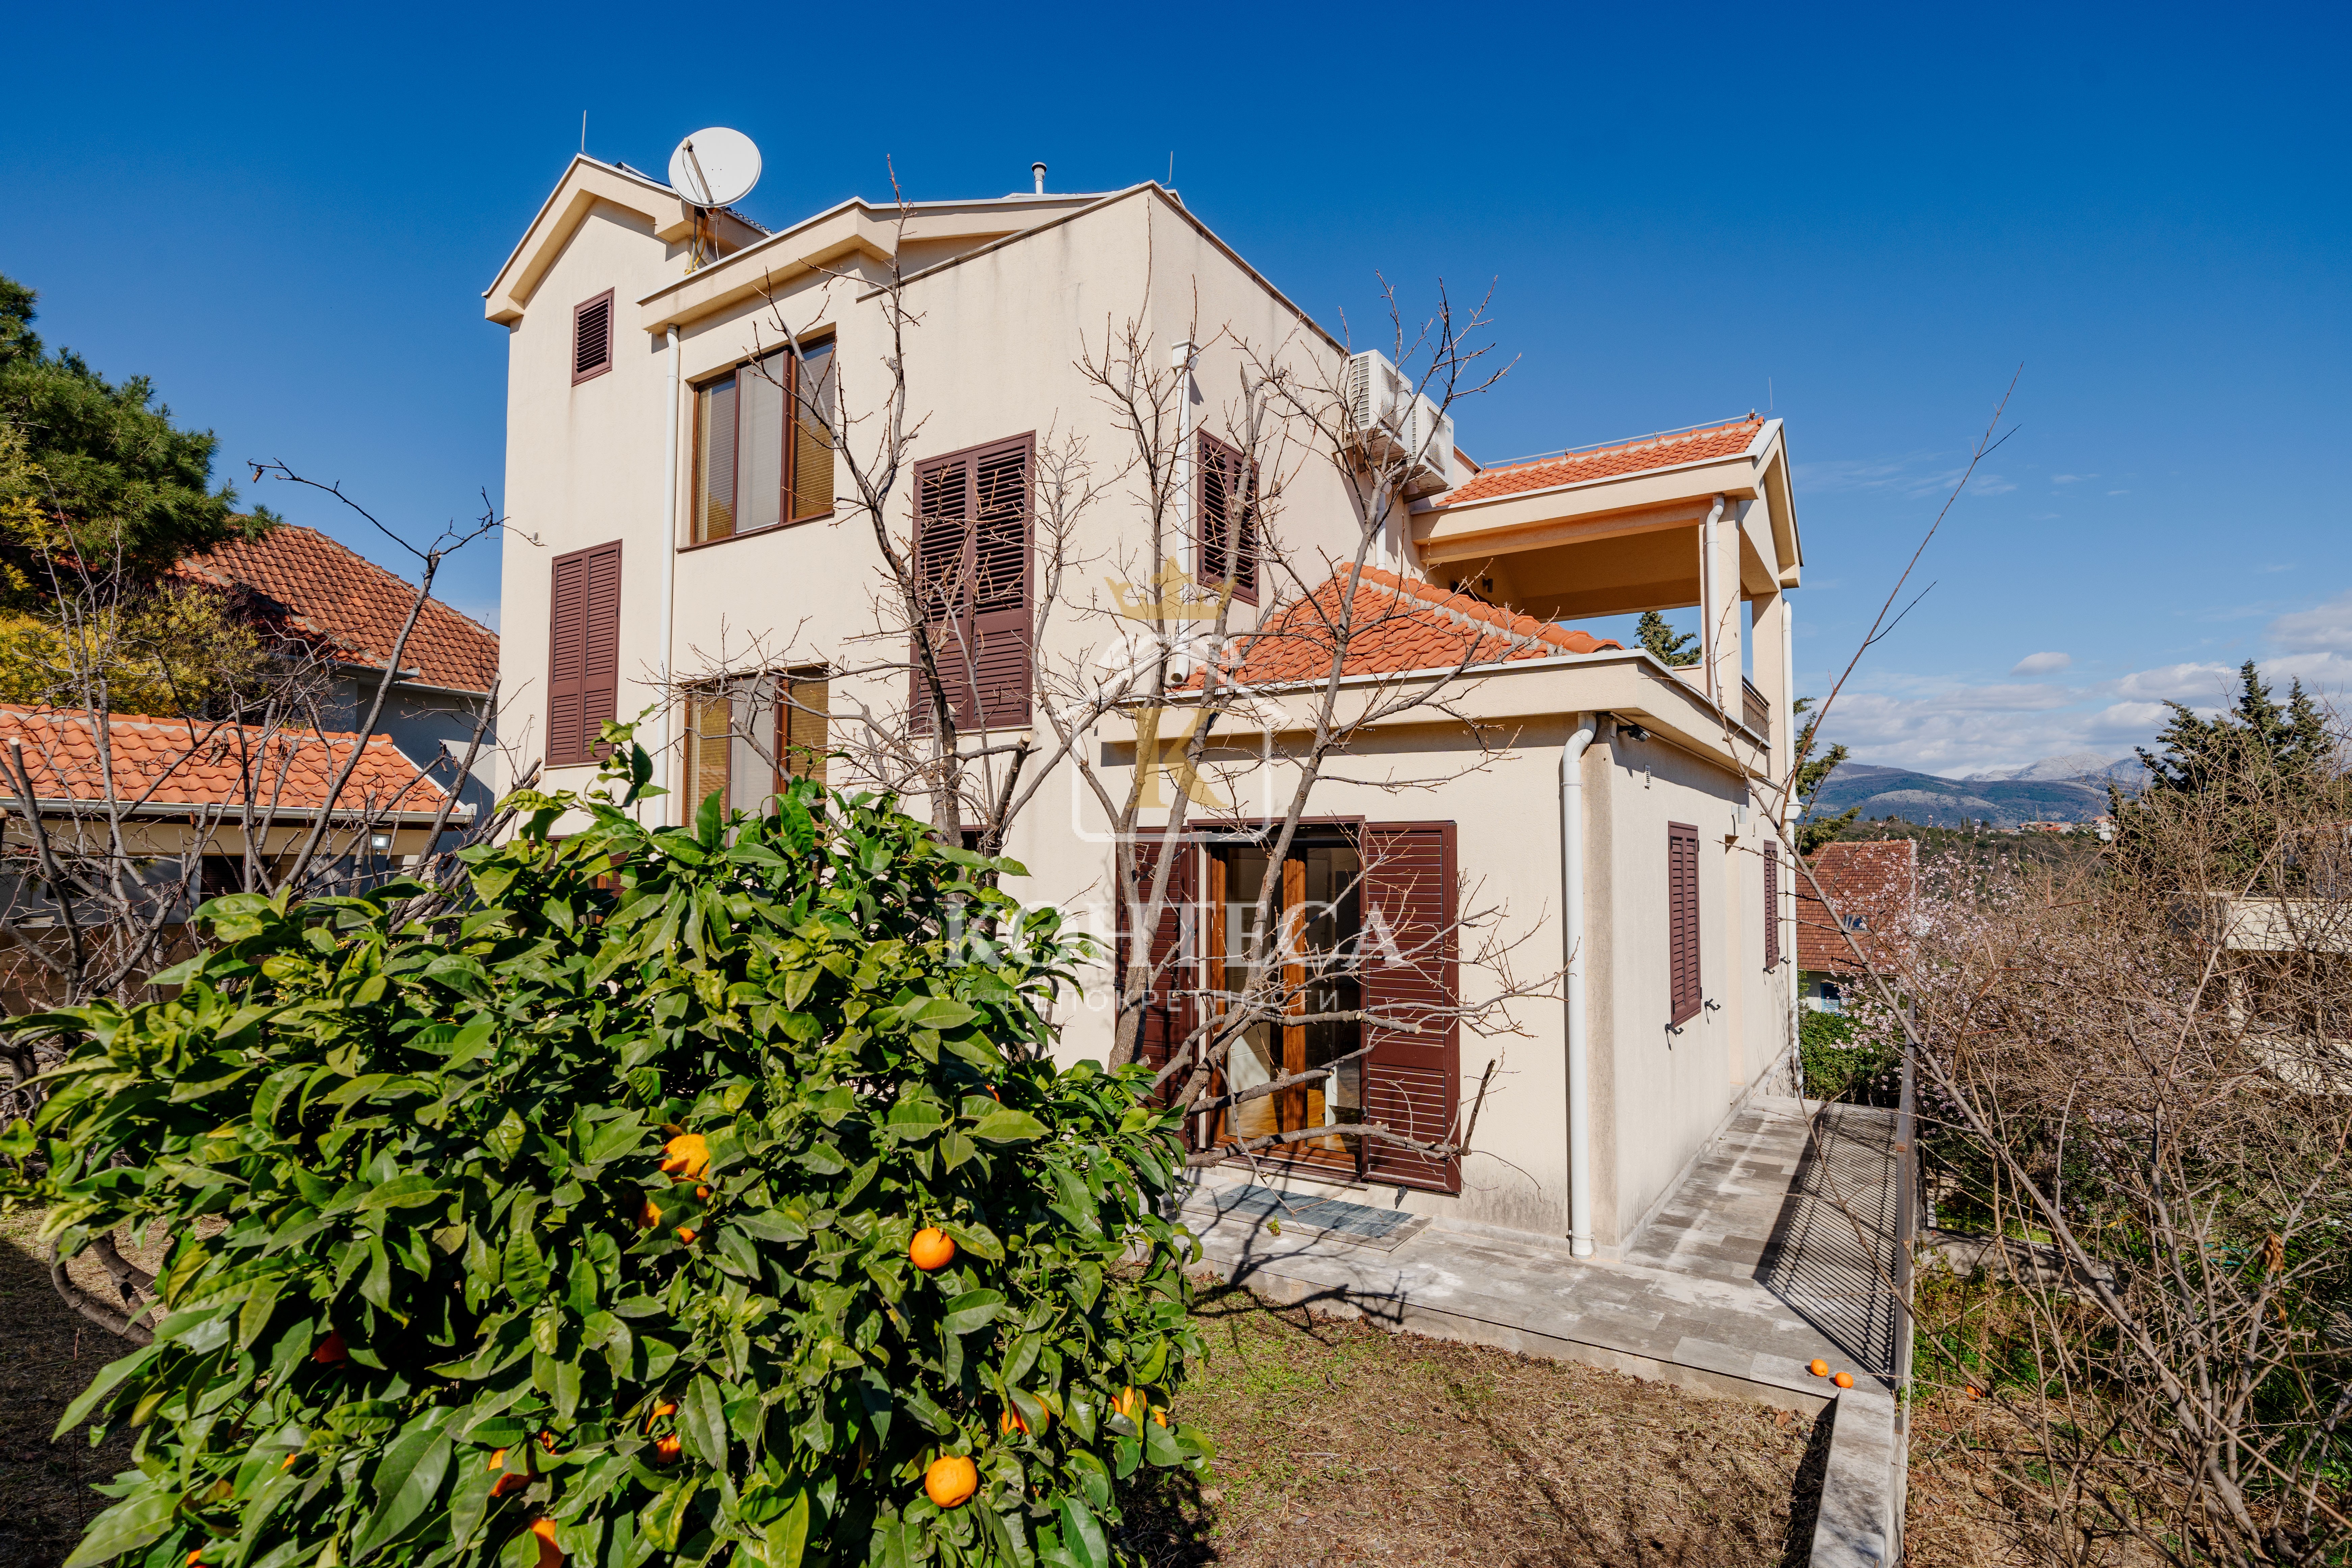 DISCOUNT!!! Exceptional offer! Villa in Radovici, 50m away from the resort Luštica Bay